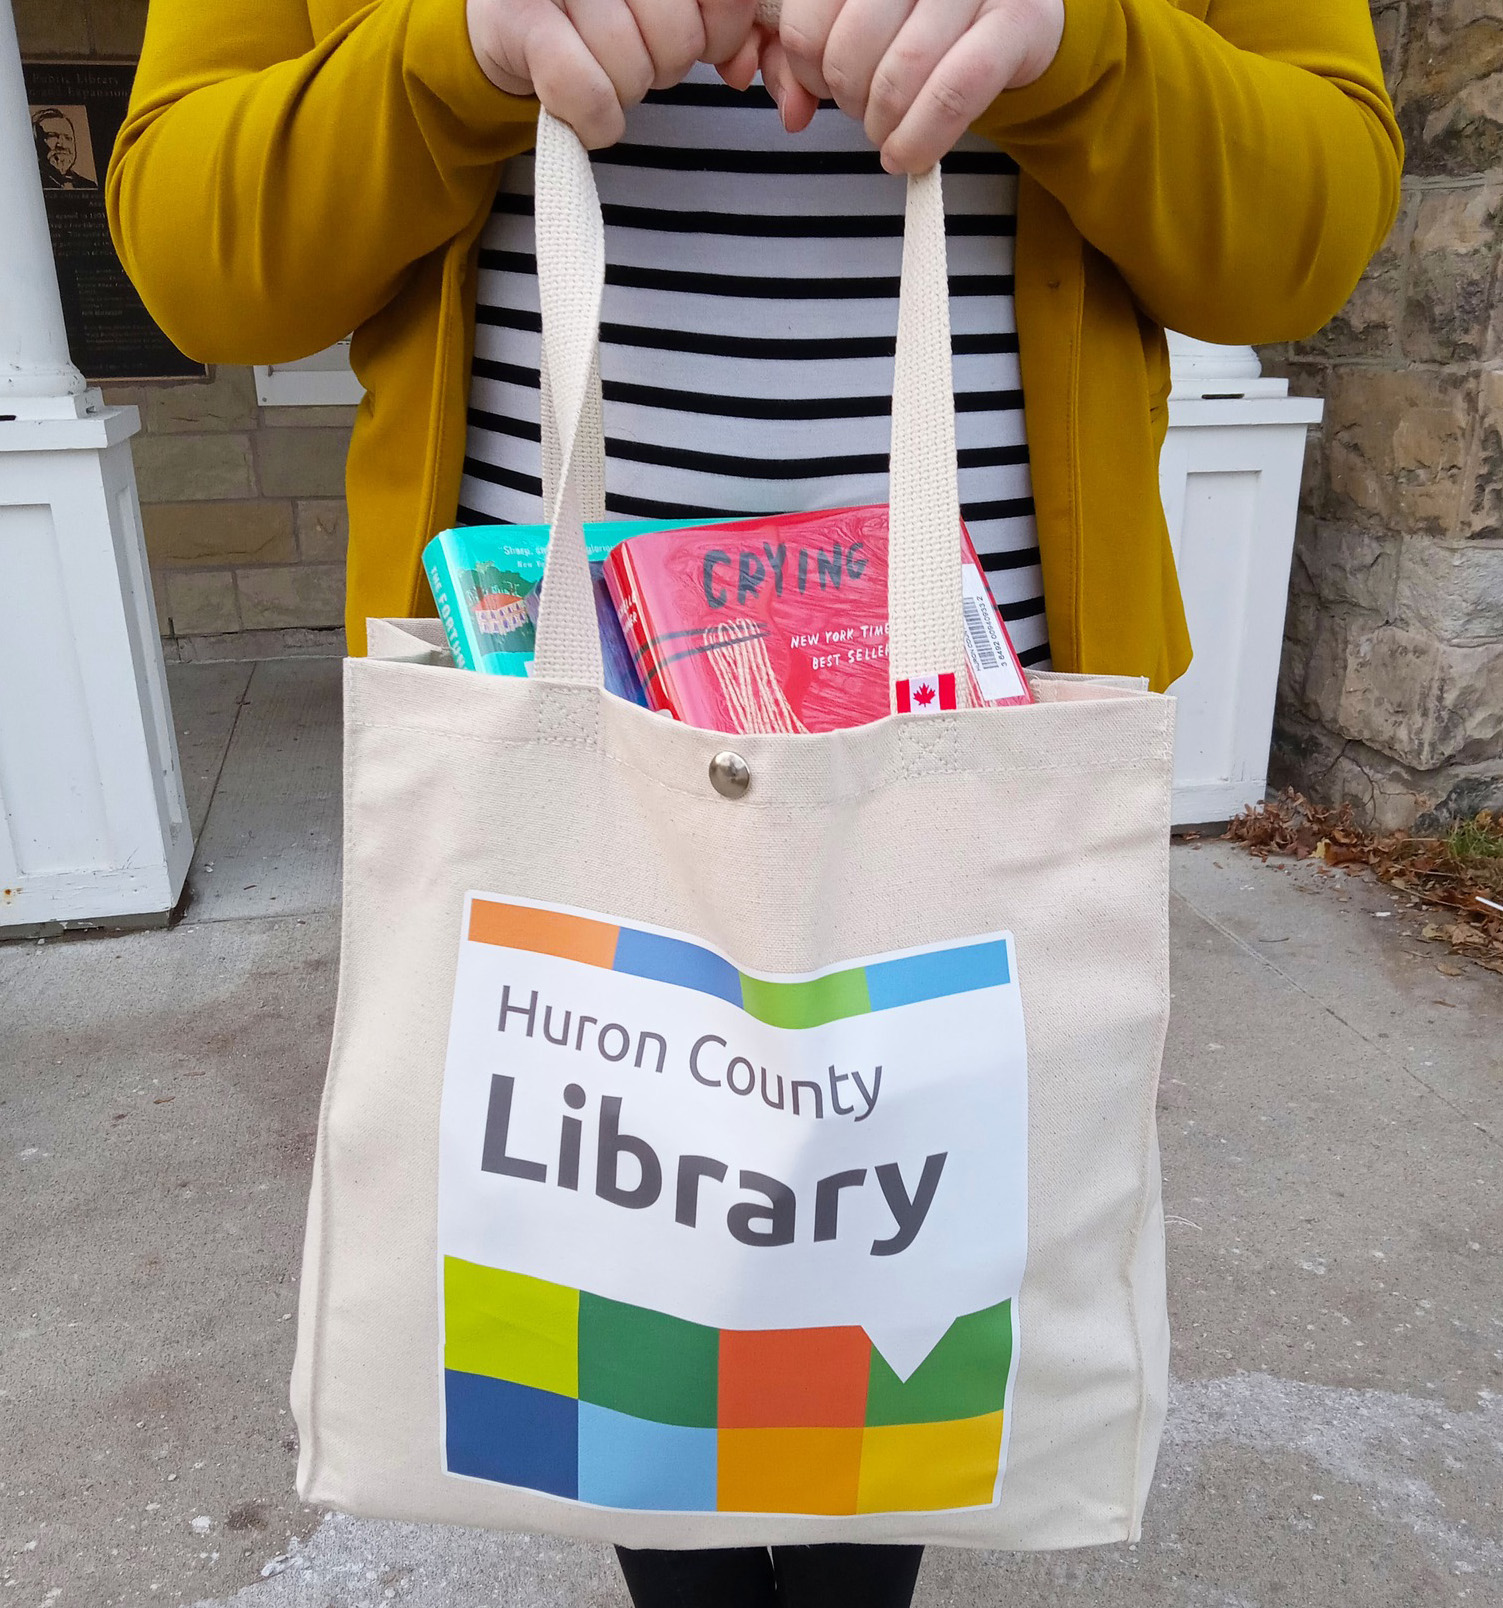 Image of a person holding up the new tote bags featuring the new Huron County Library logo on the front.